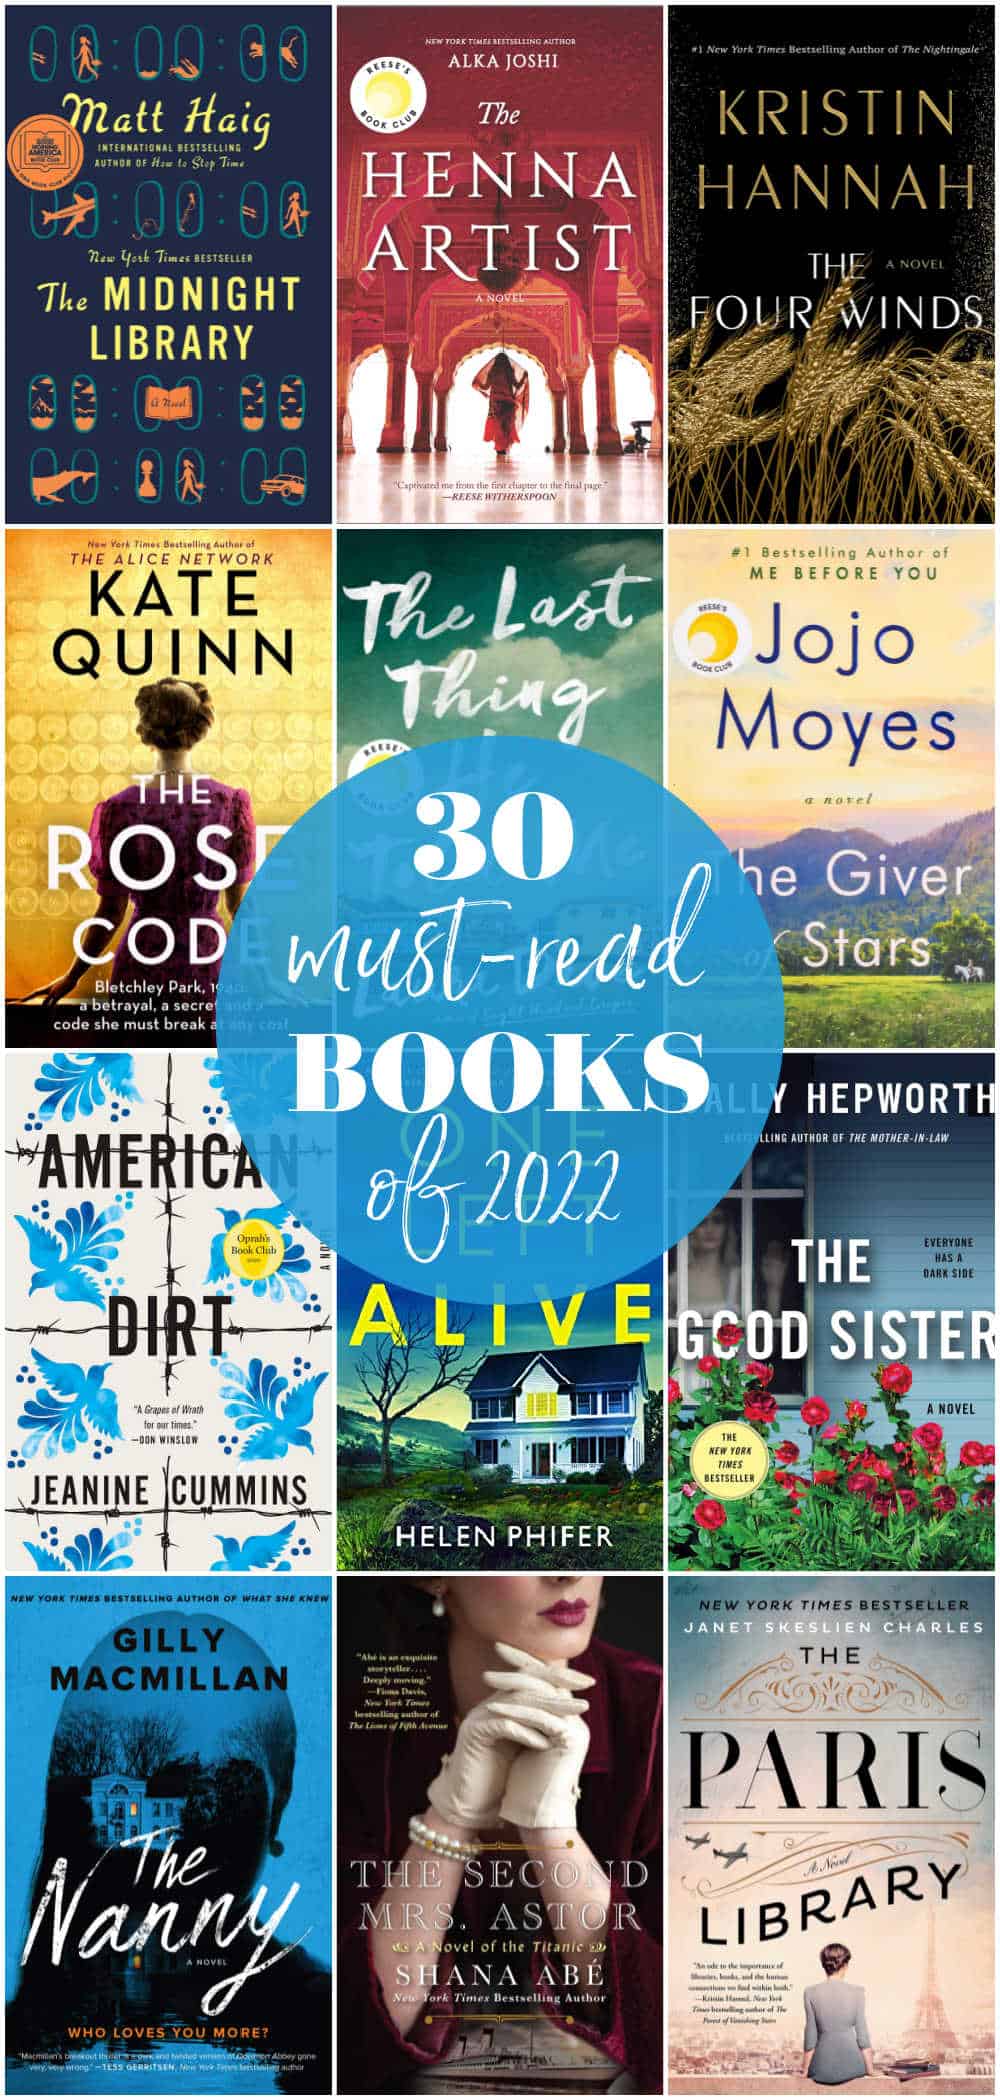 images of book covers of recommended books to read in 2022